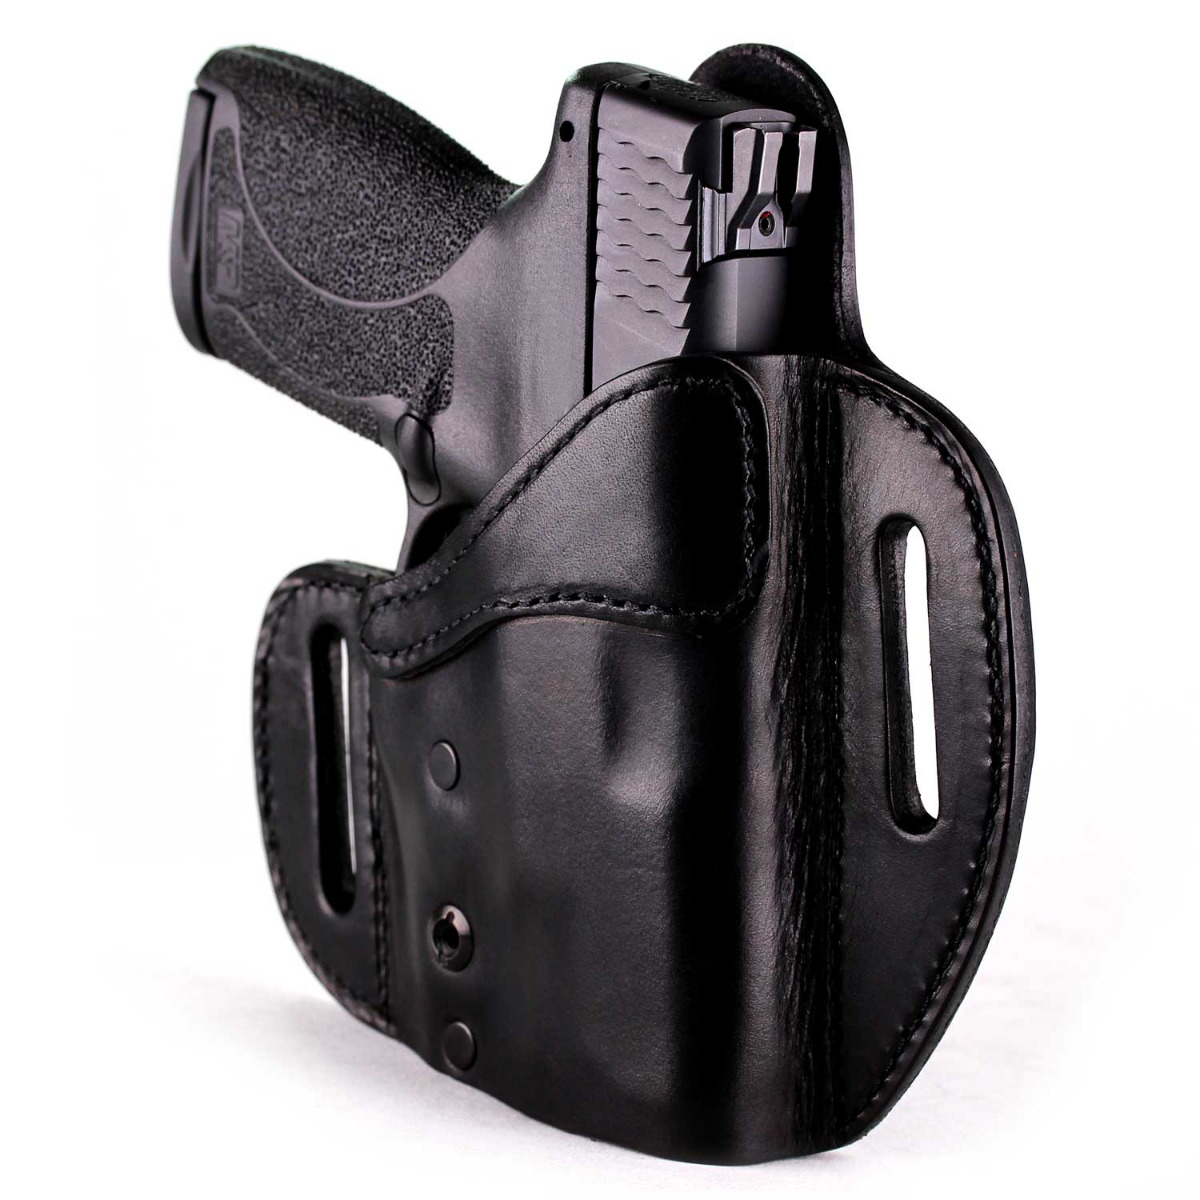 Kimber Micro Ultra CarryIWB Conceal Carry CCW Holster w/ Sweat Guard 